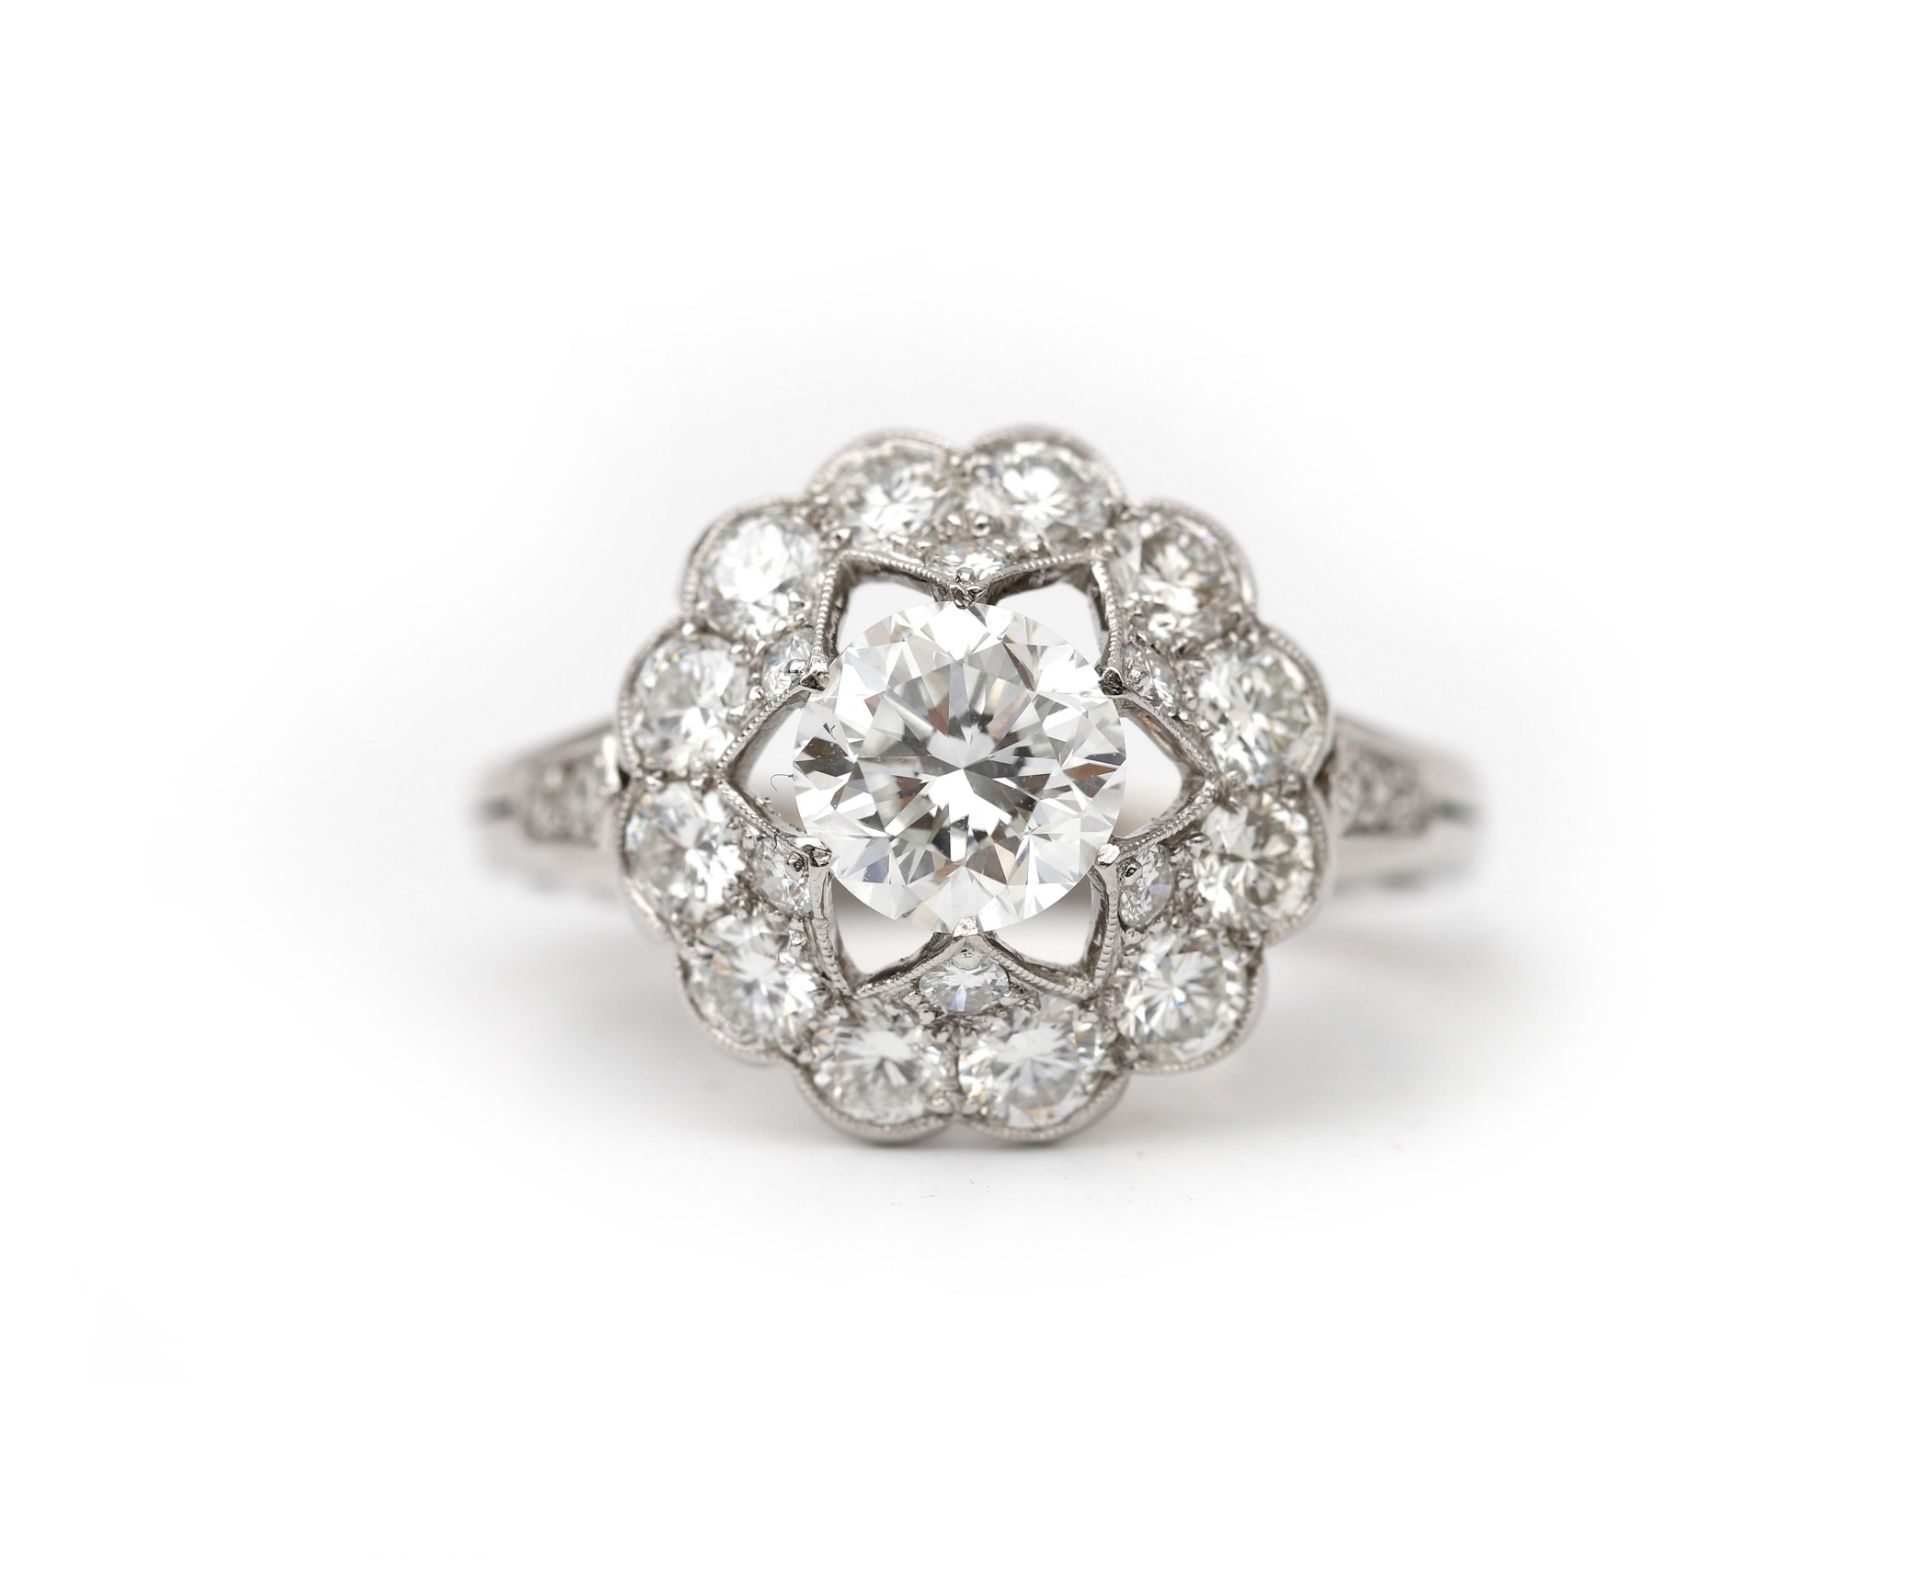 A 14 karat white gold with platinum rosette ring, set with diamonds, in total approx. 2.21ct. - Image 2 of 10